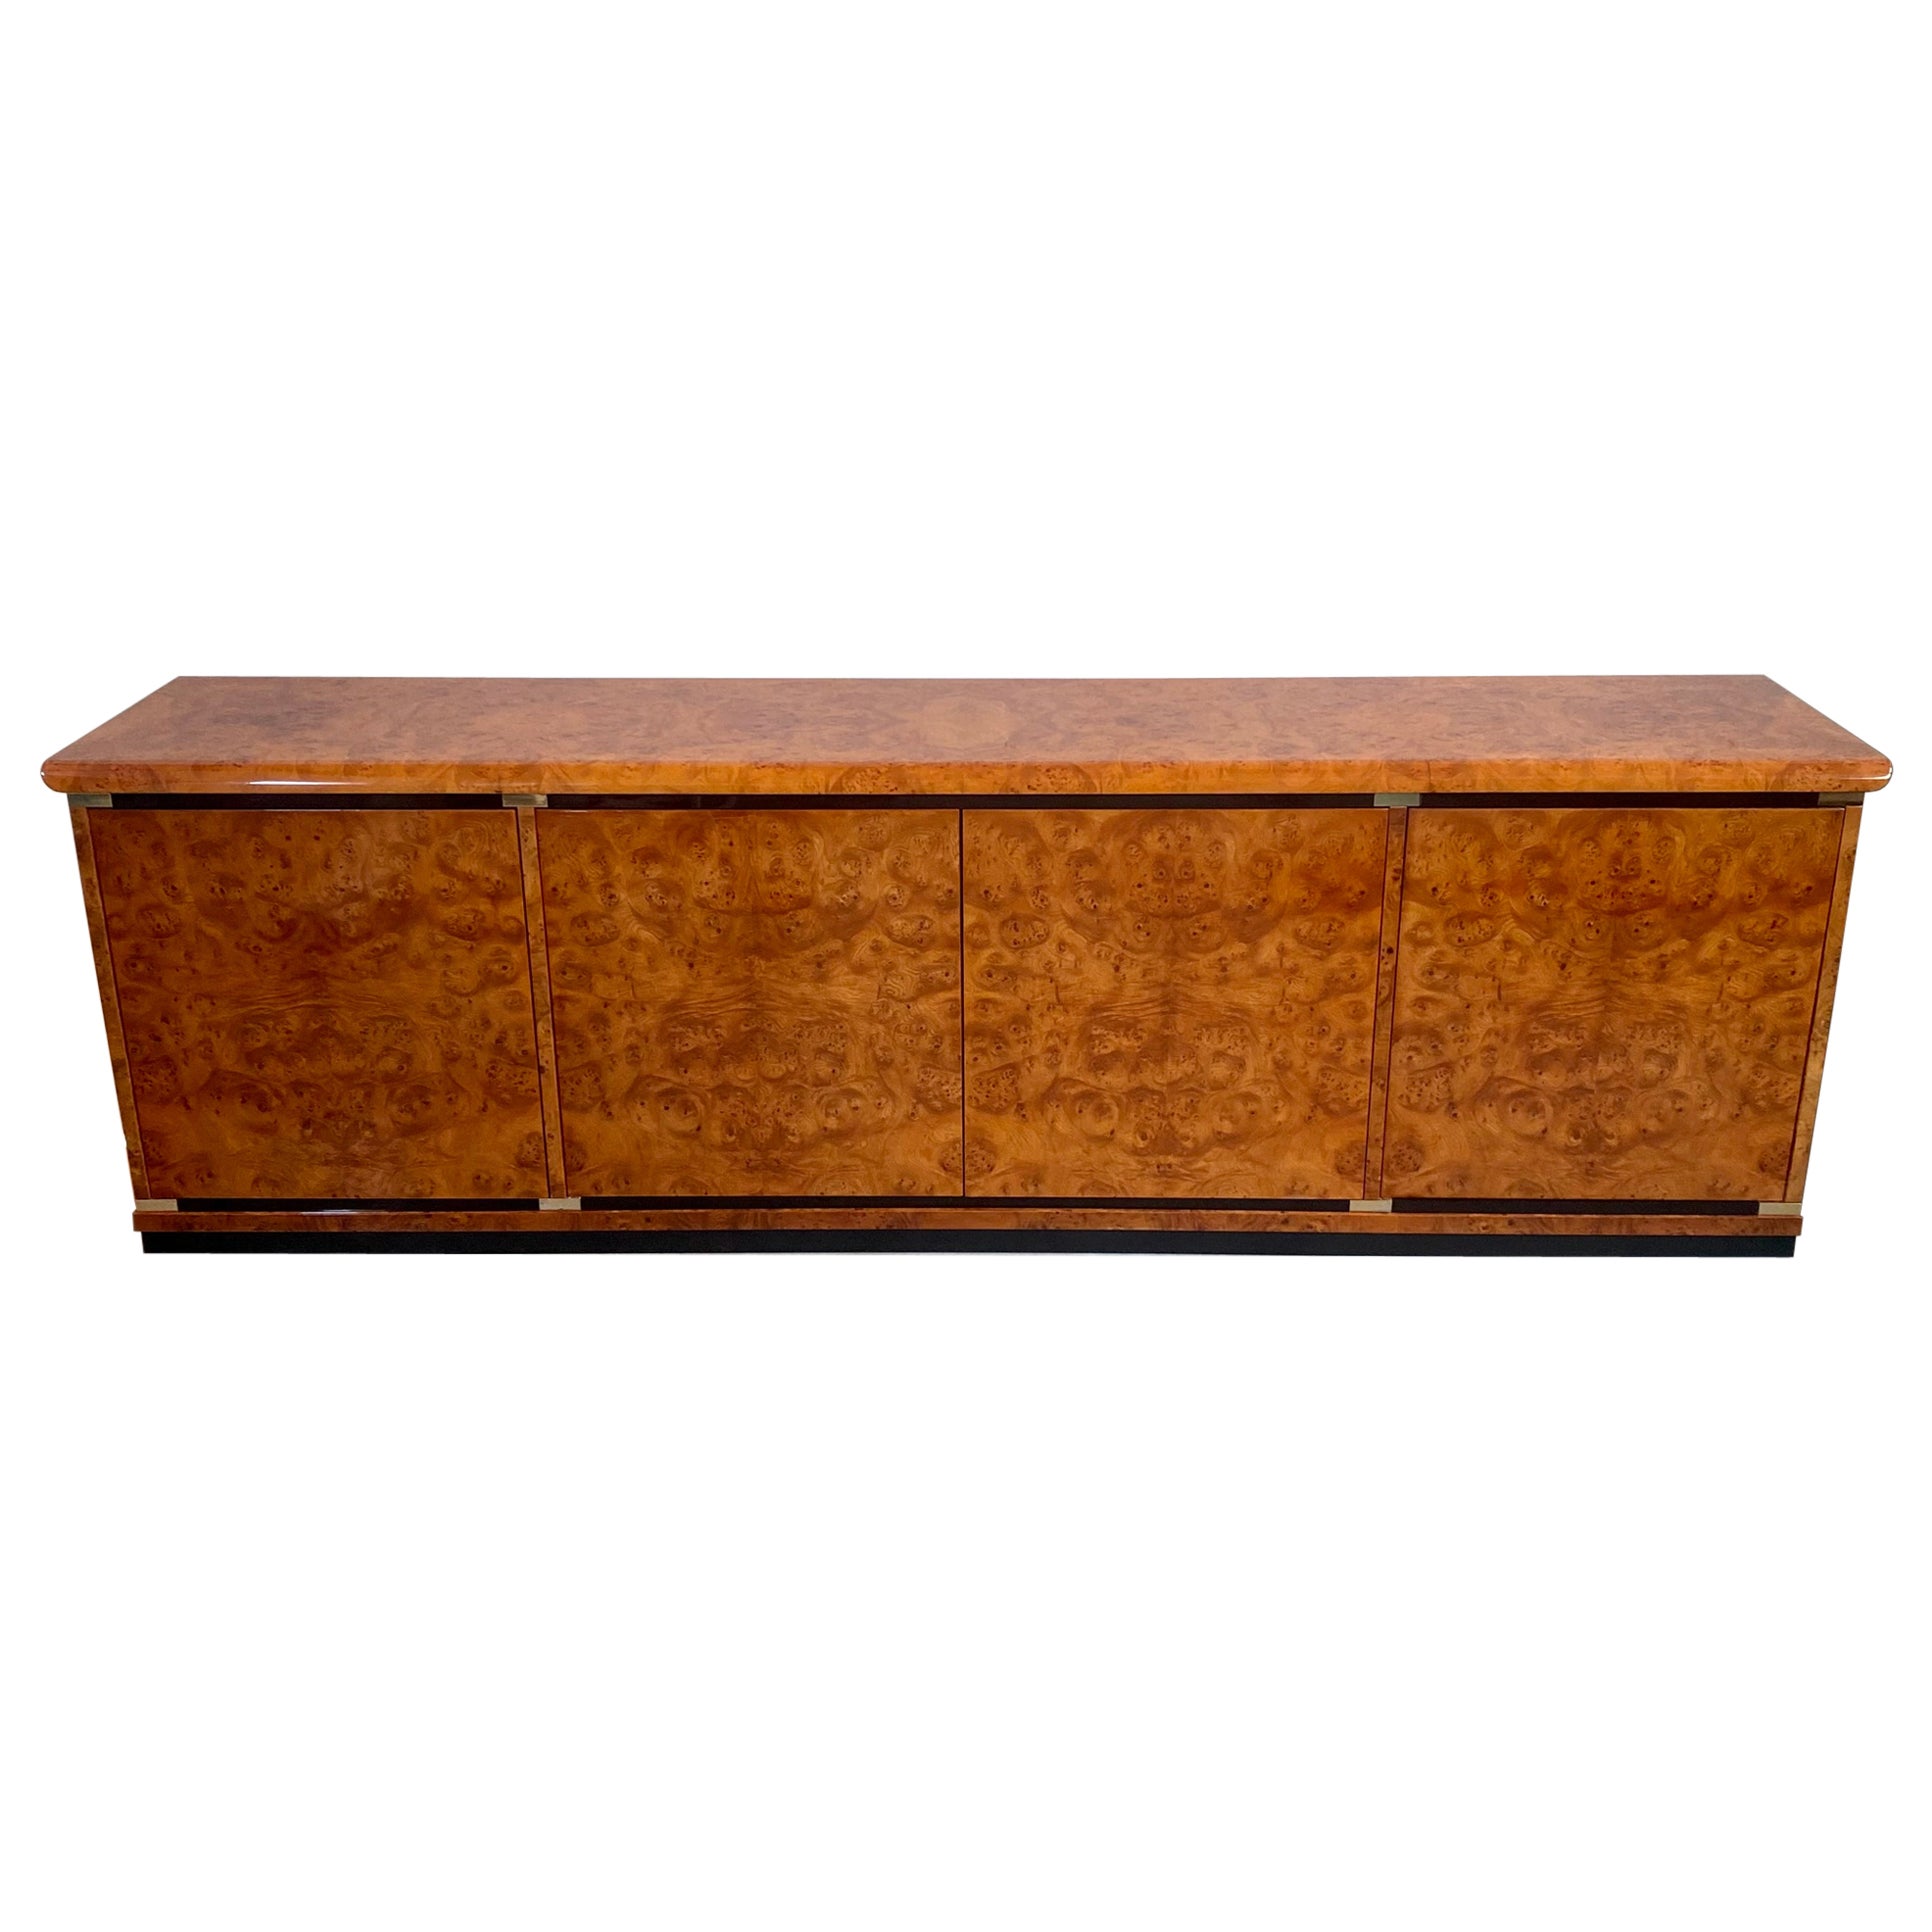 Briar Burl Wood Sideboard by Guerini Emilio for Gdm 24 Kt Gold Plated Italy 1980 For Sale